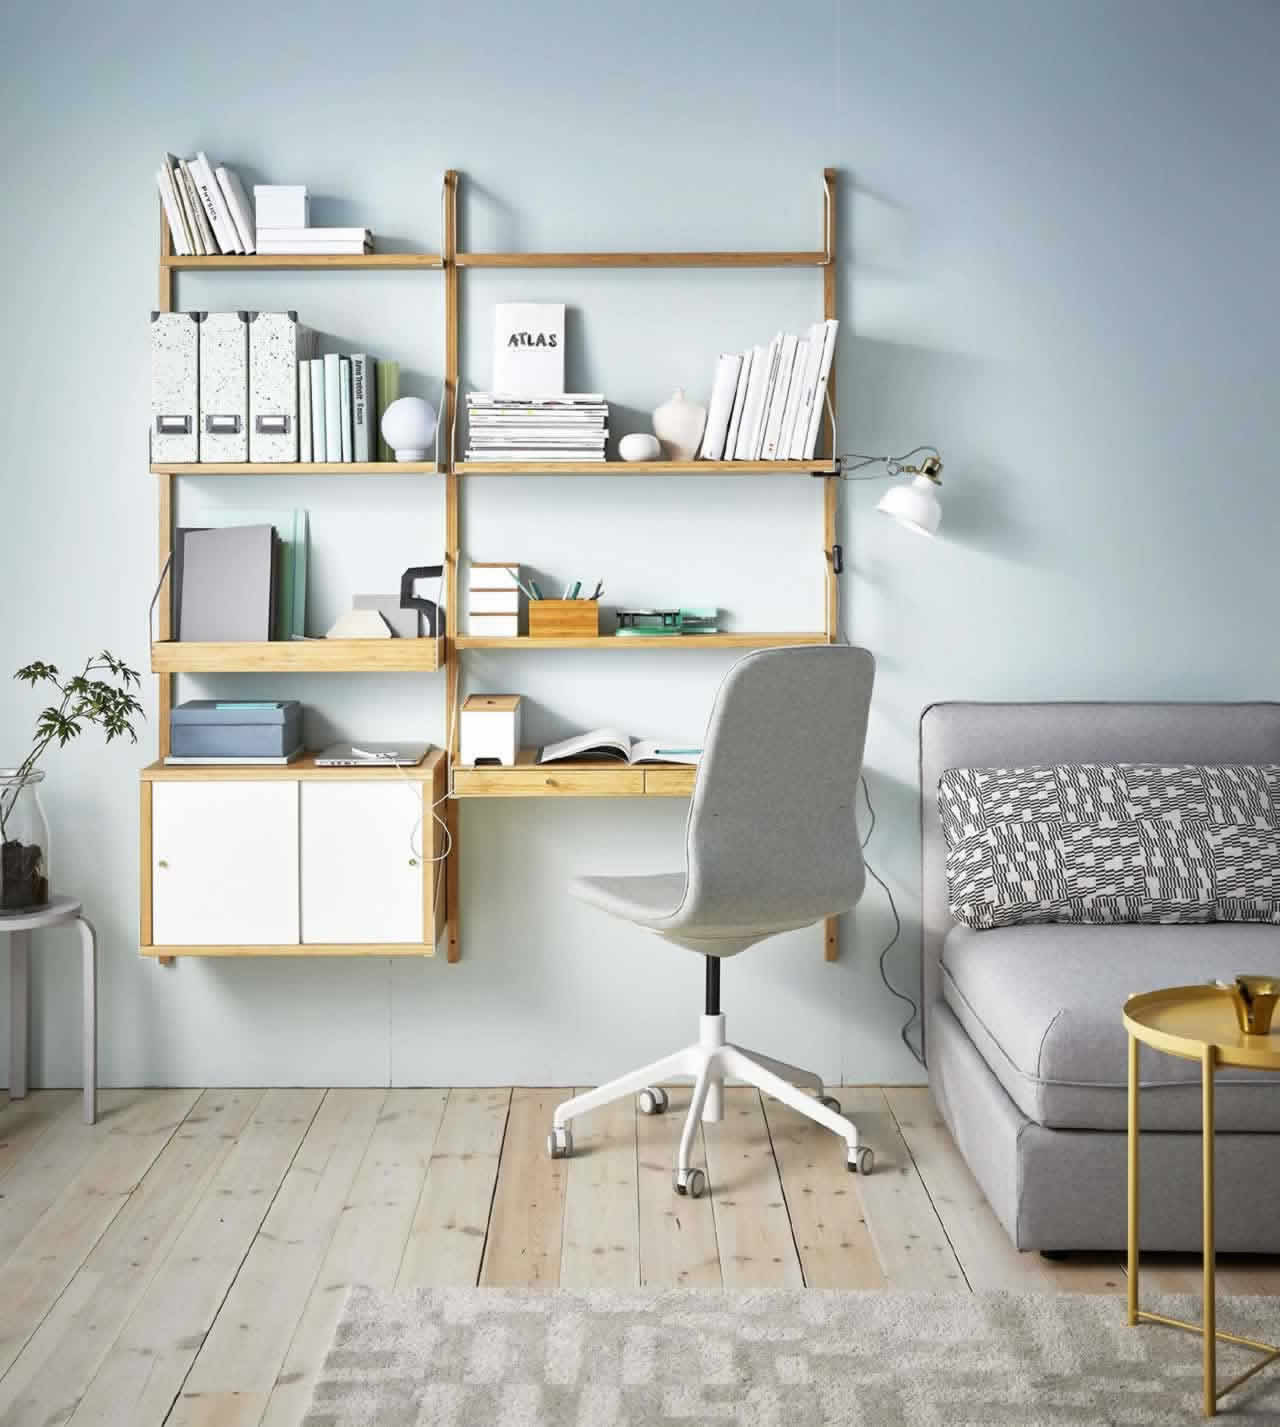 IKEA Ideas - 5 study space ideas for any space at home